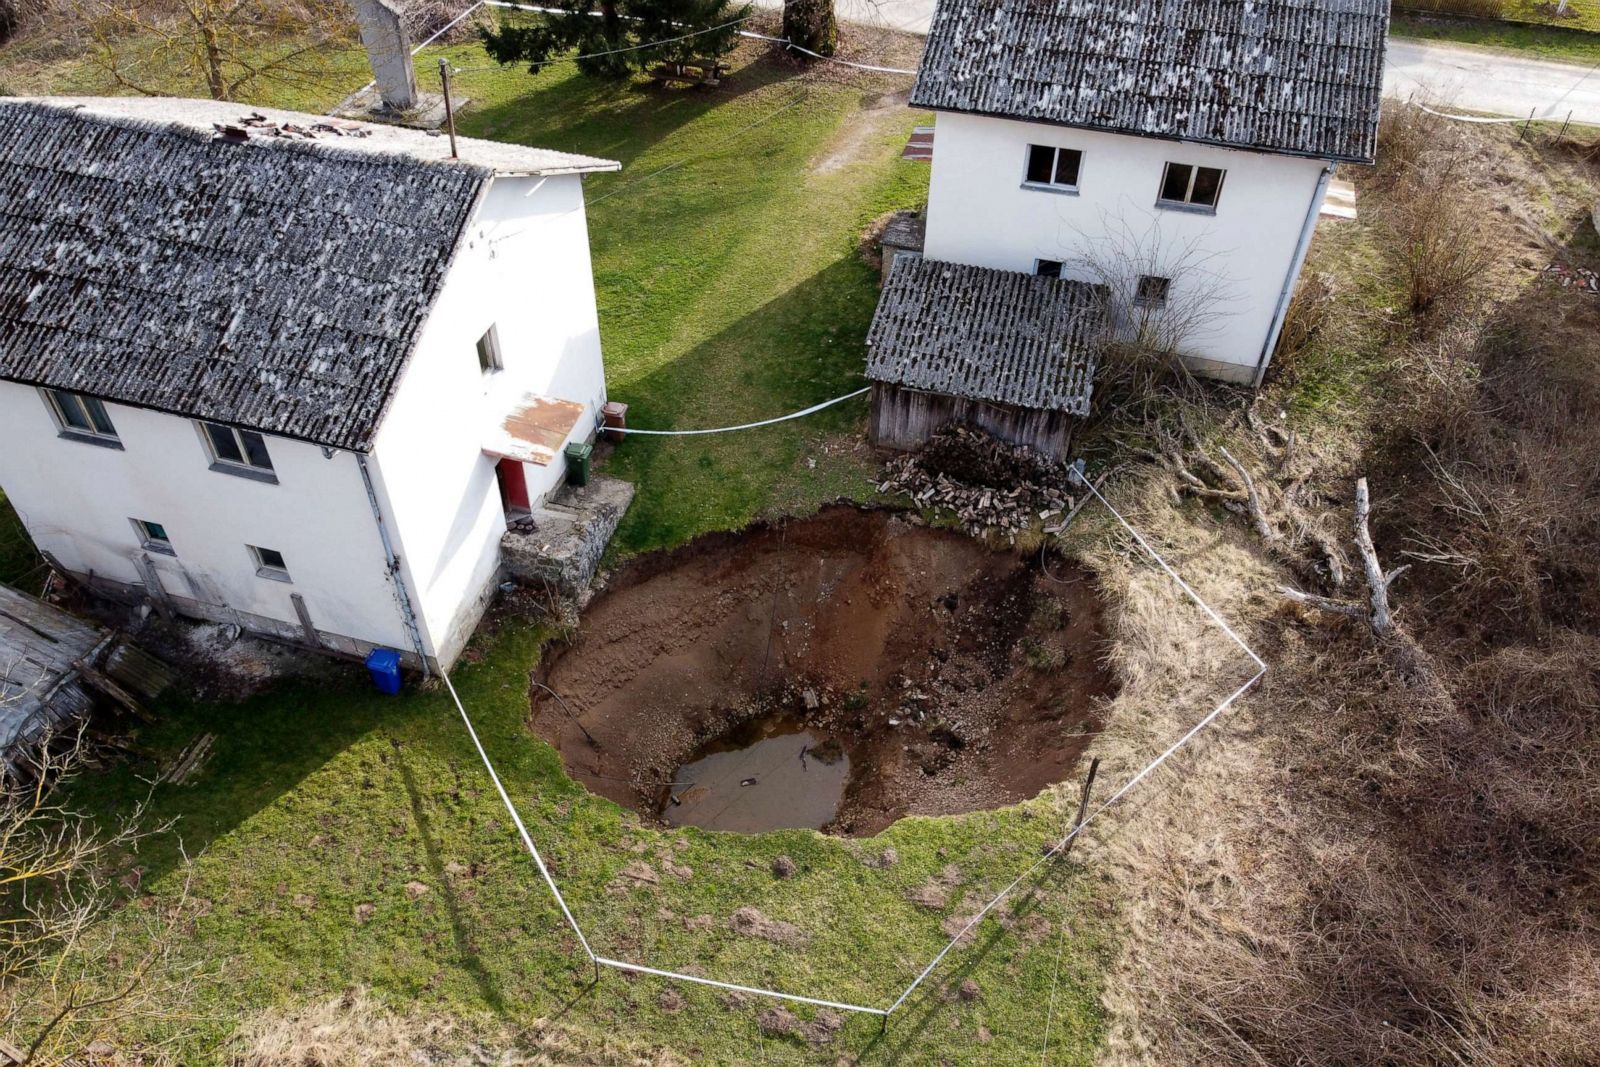 A New Sinkhole Discovered In Siberia Picture Incredible Sinkholes Around The World ABC News